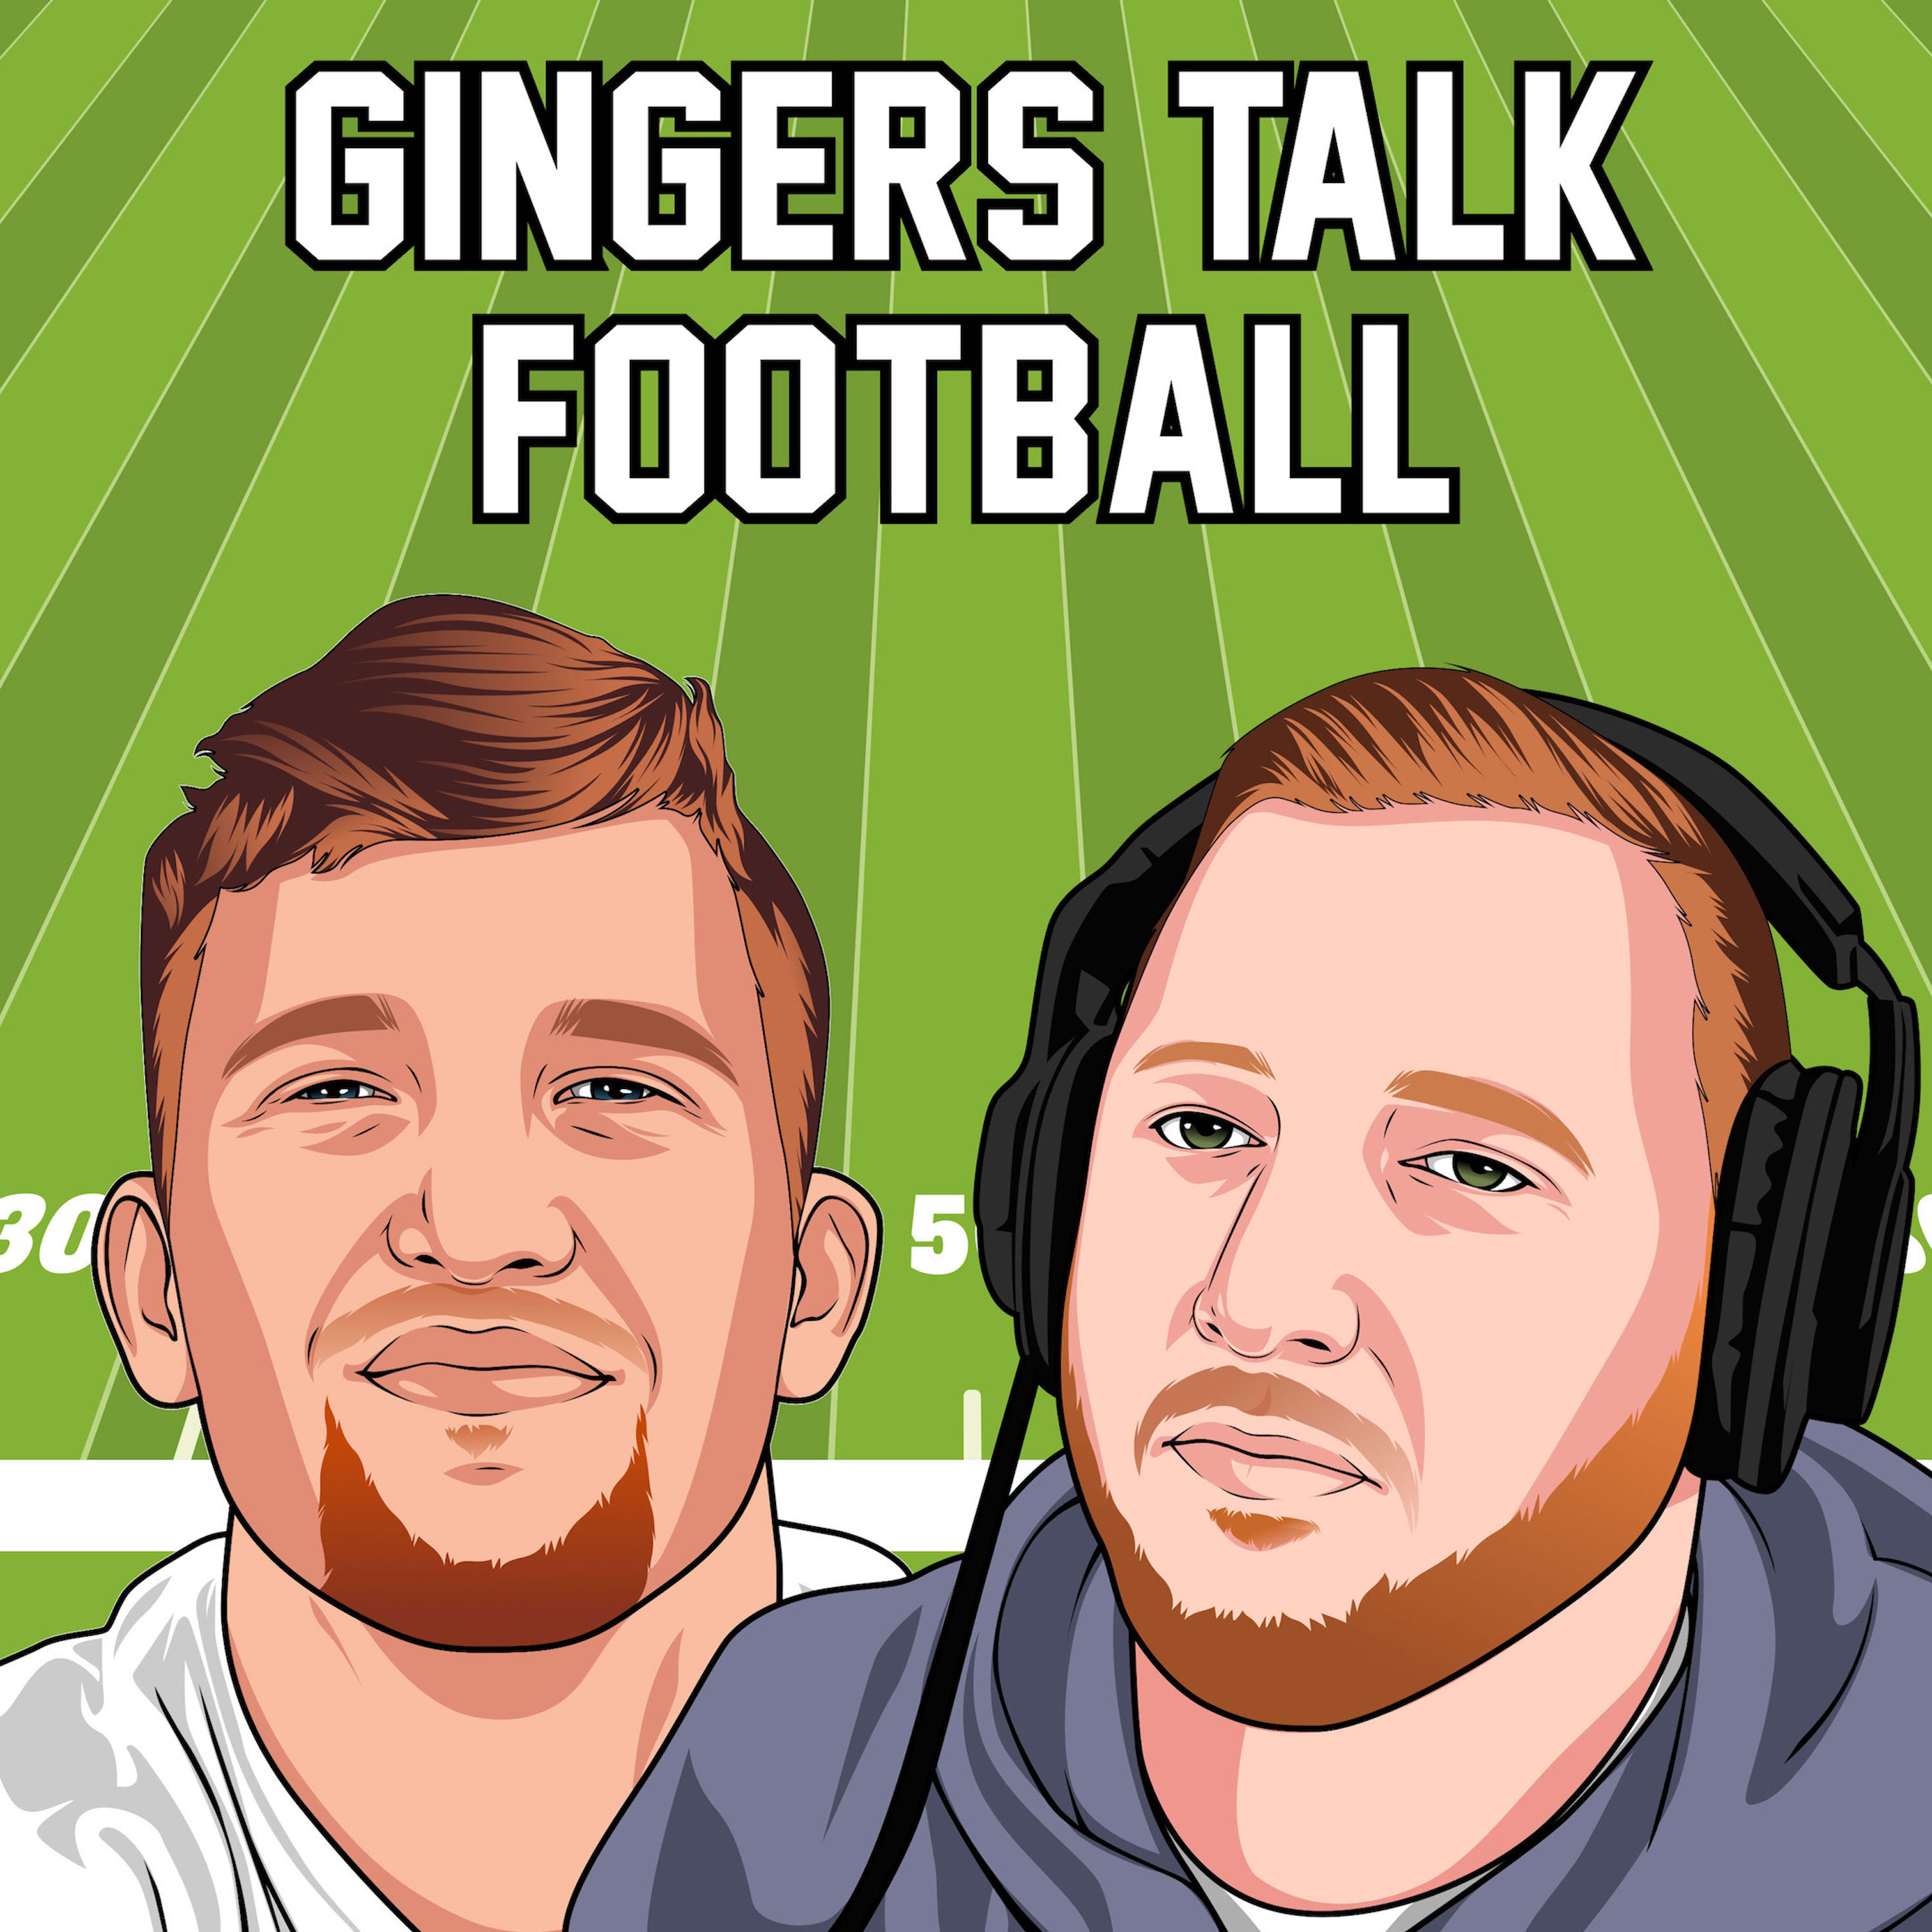 Friday, November 27, 2020 - Thanksgiving Football Recap, Week 12 NFL Preview and Picks - Gingers Talk Football Podcast